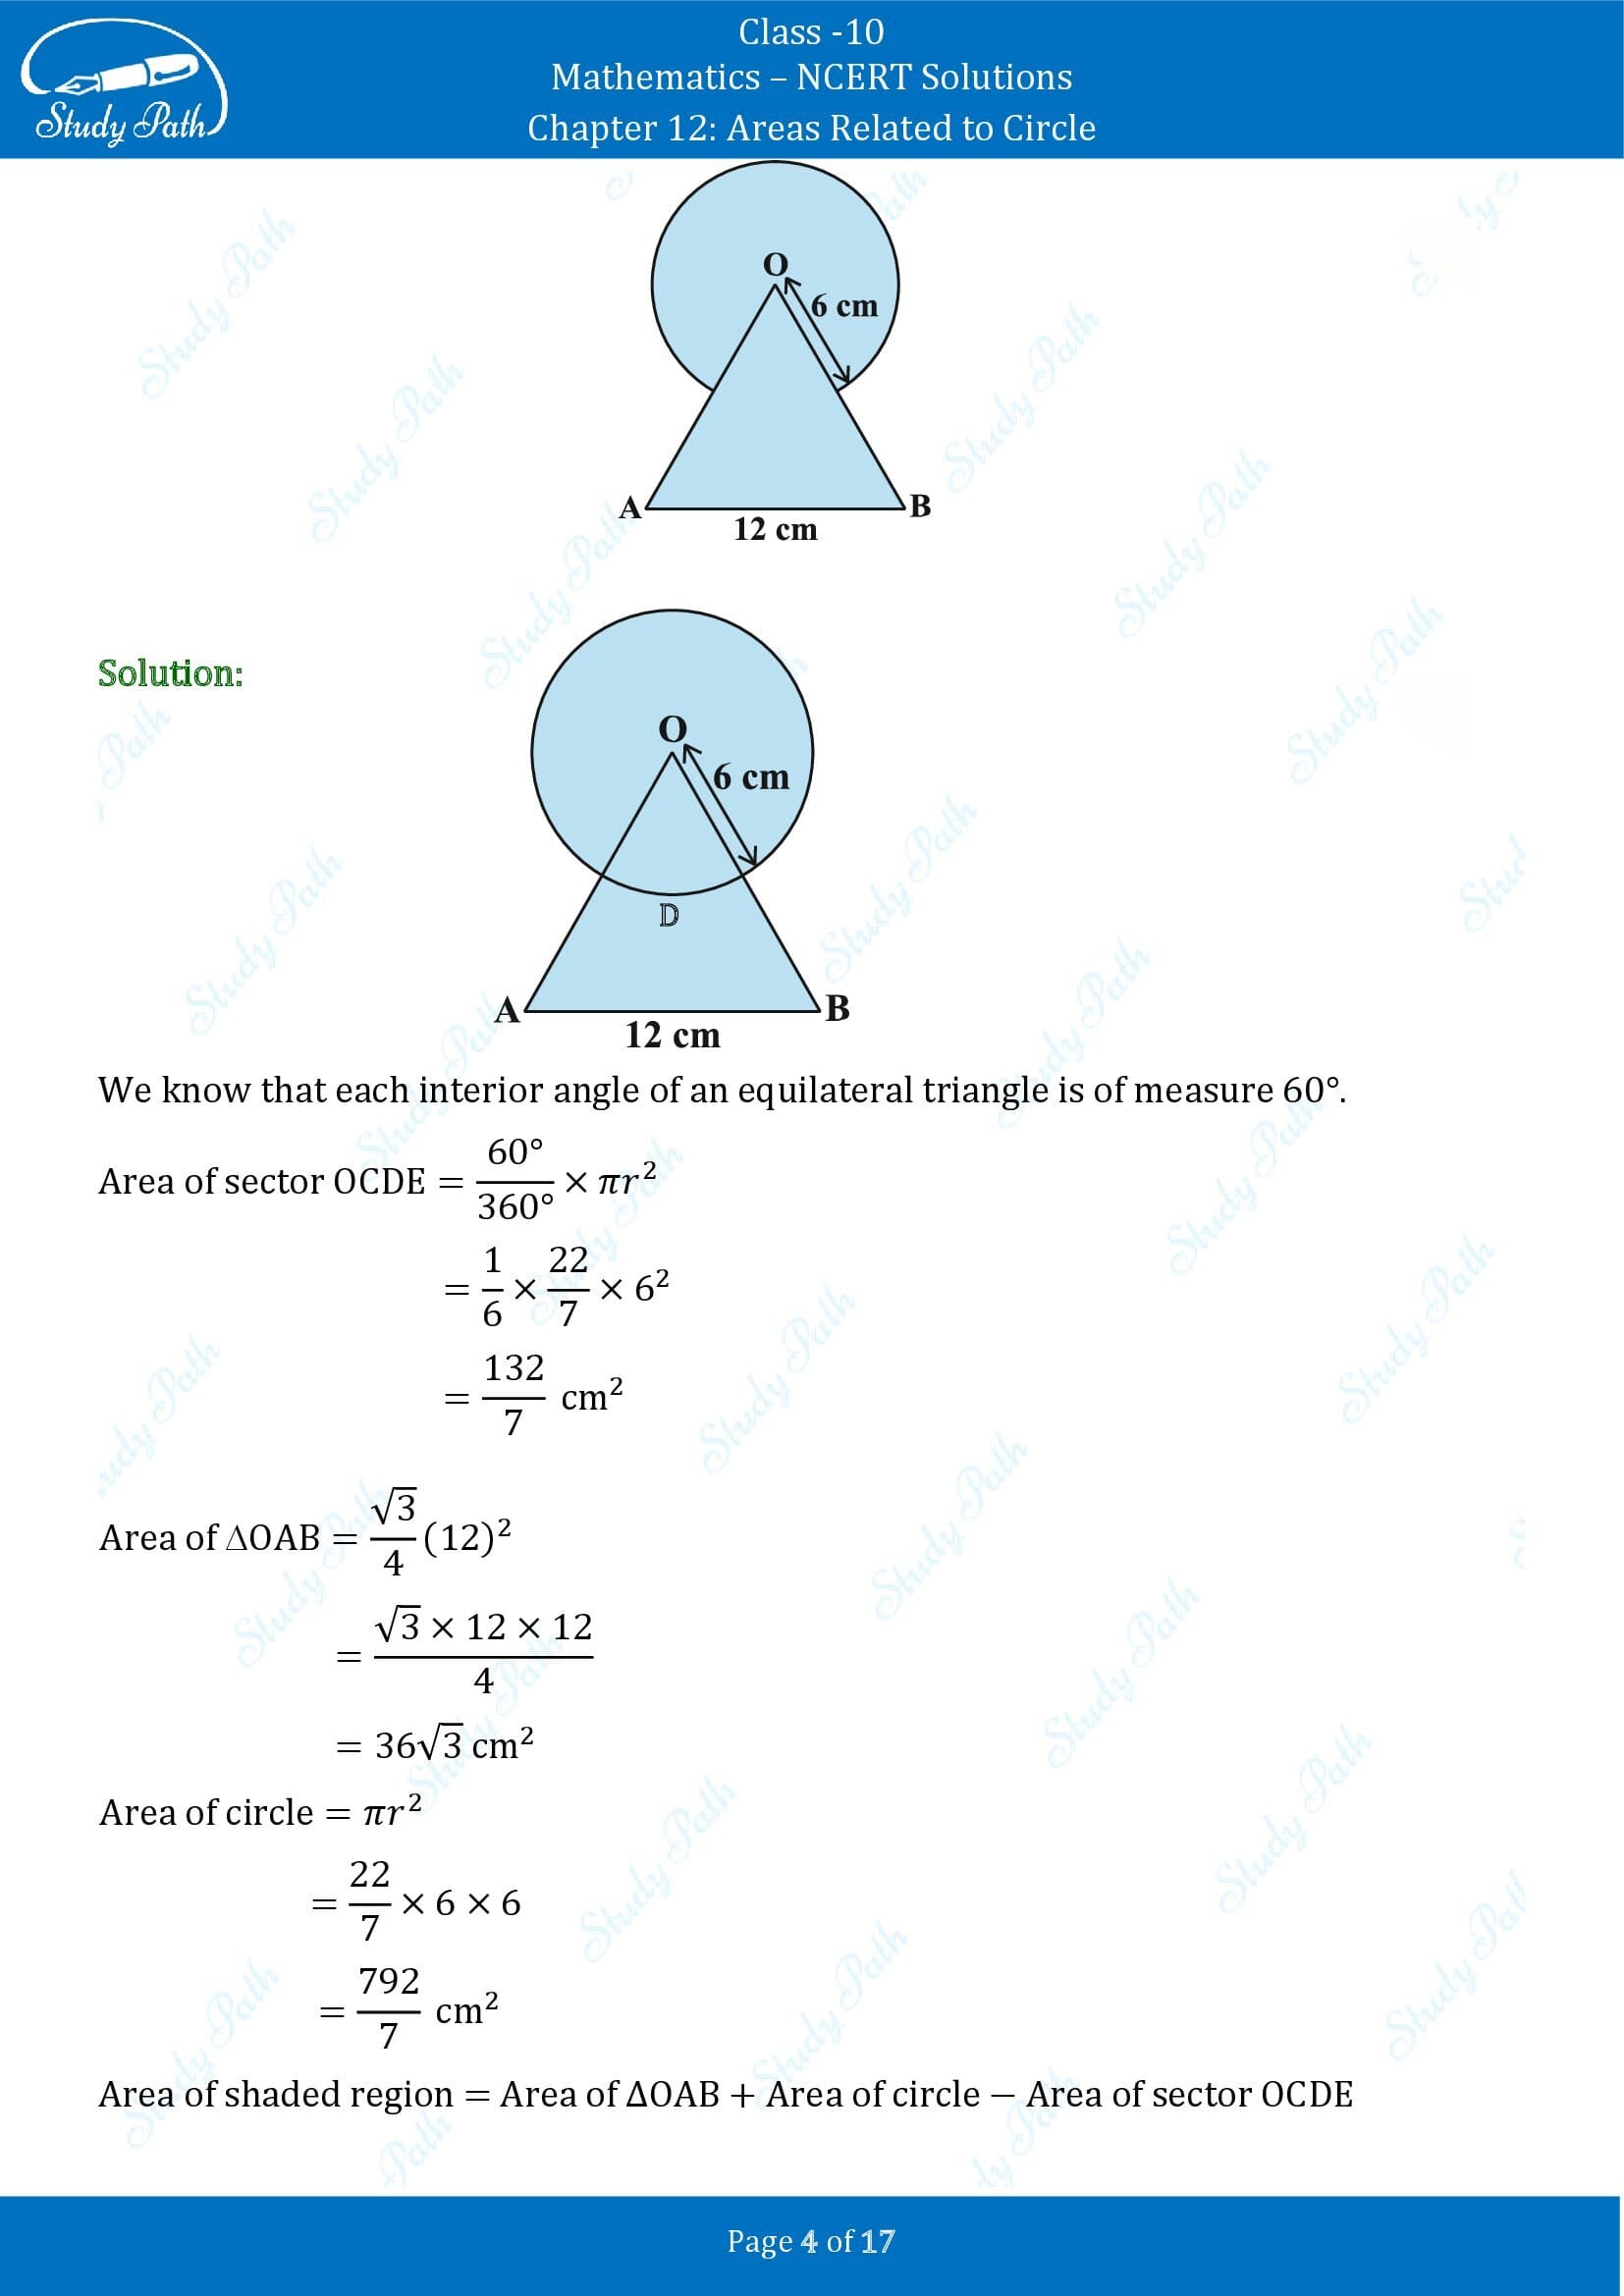 NCERT Solutions for Class 10 Maths Chapter 12 Areas Related to Circles Exercise 12.3 00004